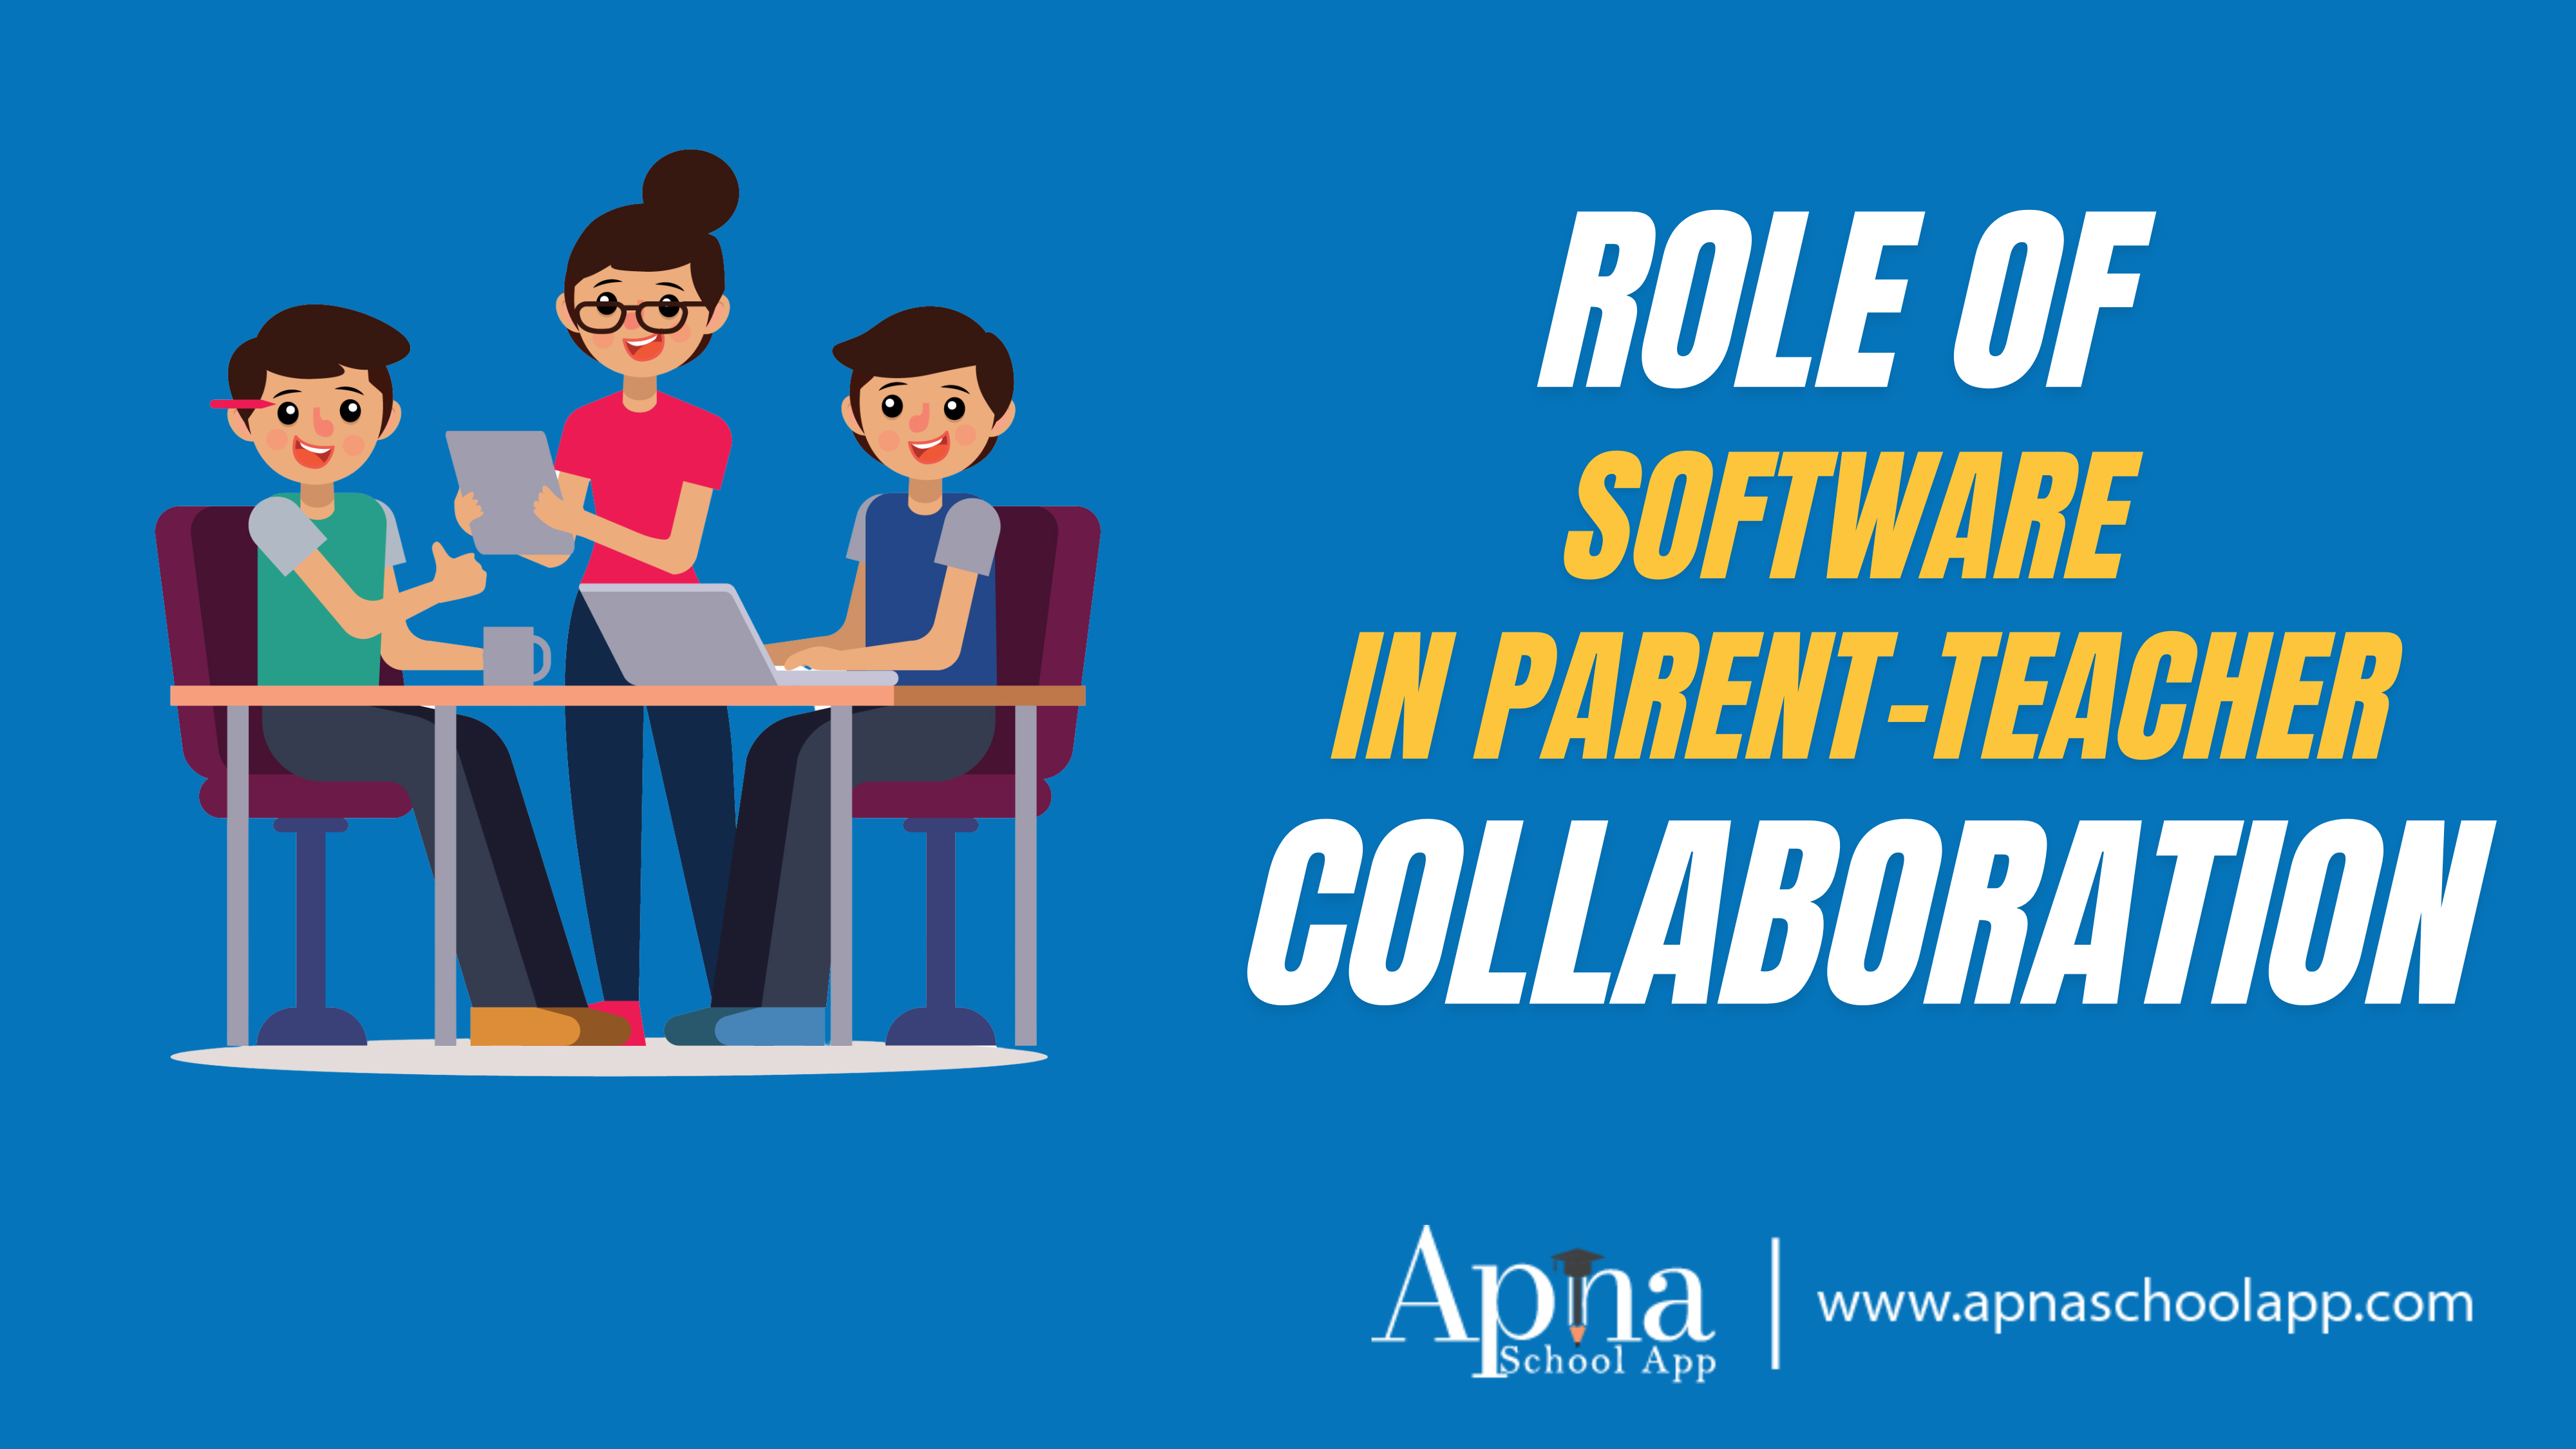 Streamlining Communication: The Role of Software in Parent-Teacher Collaboration